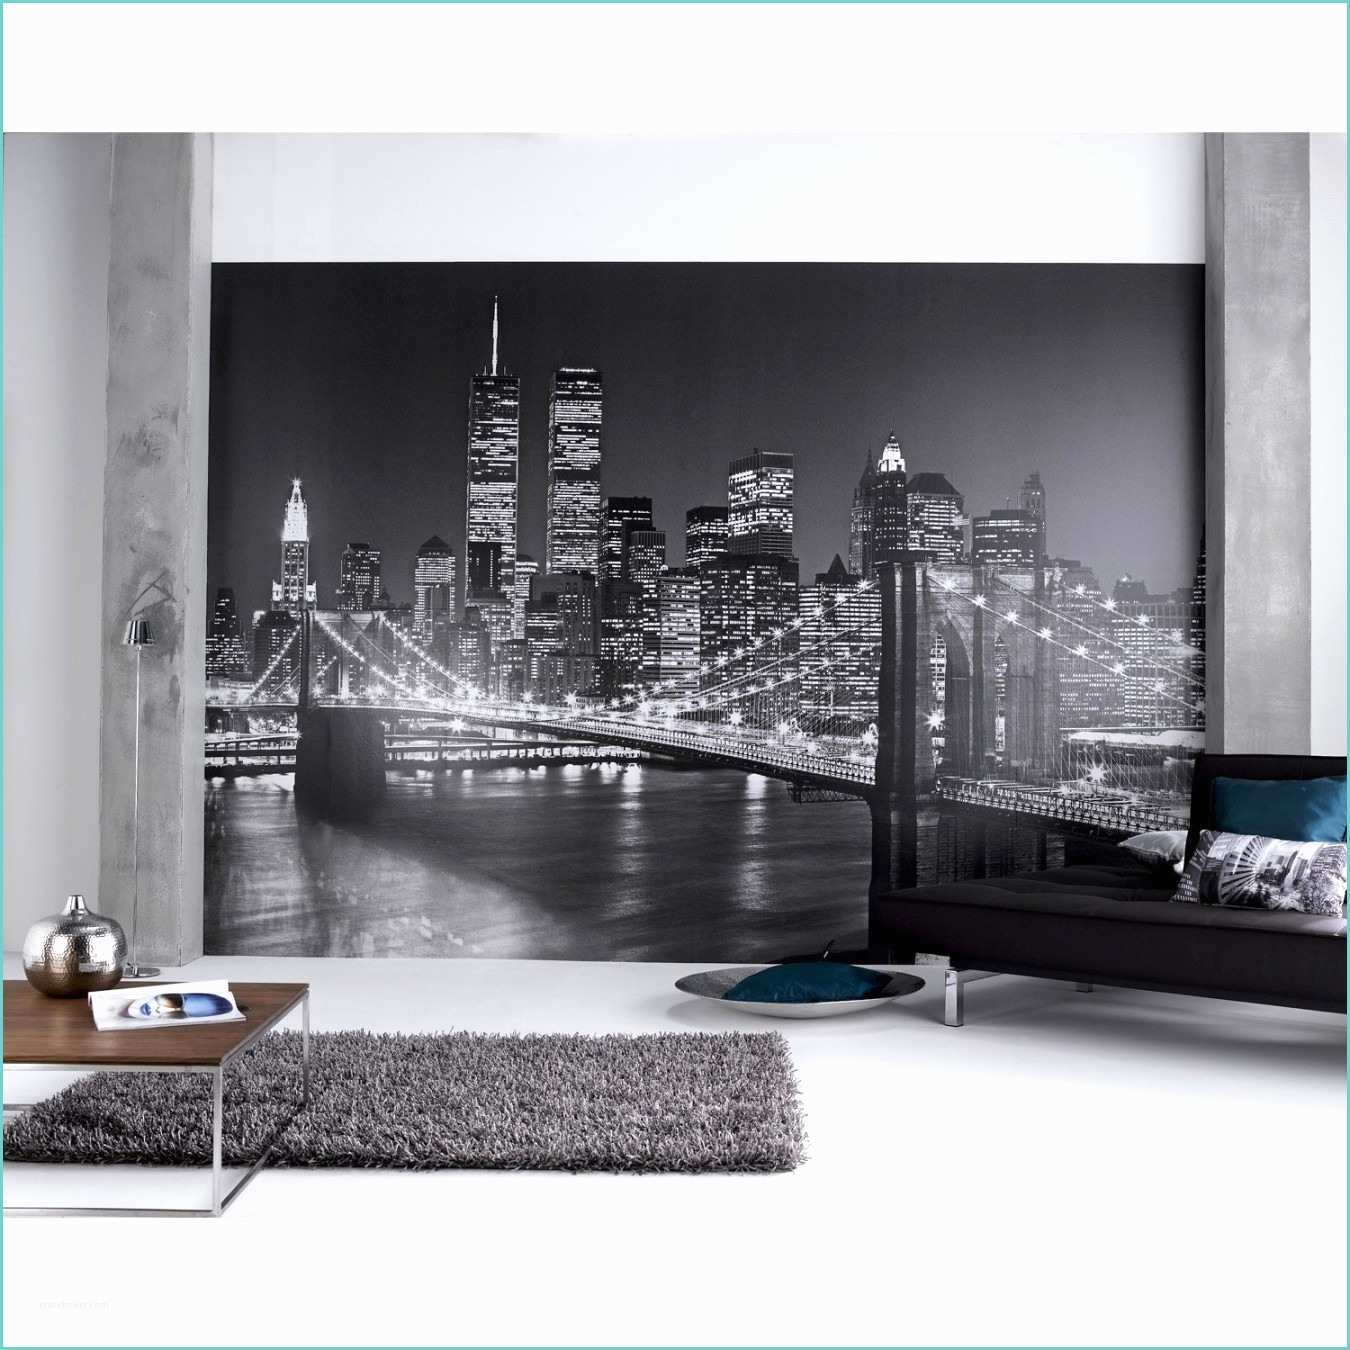 Poster Mural Geant Pas Cher 34 Grand Poster Mural Pas Cher Idees